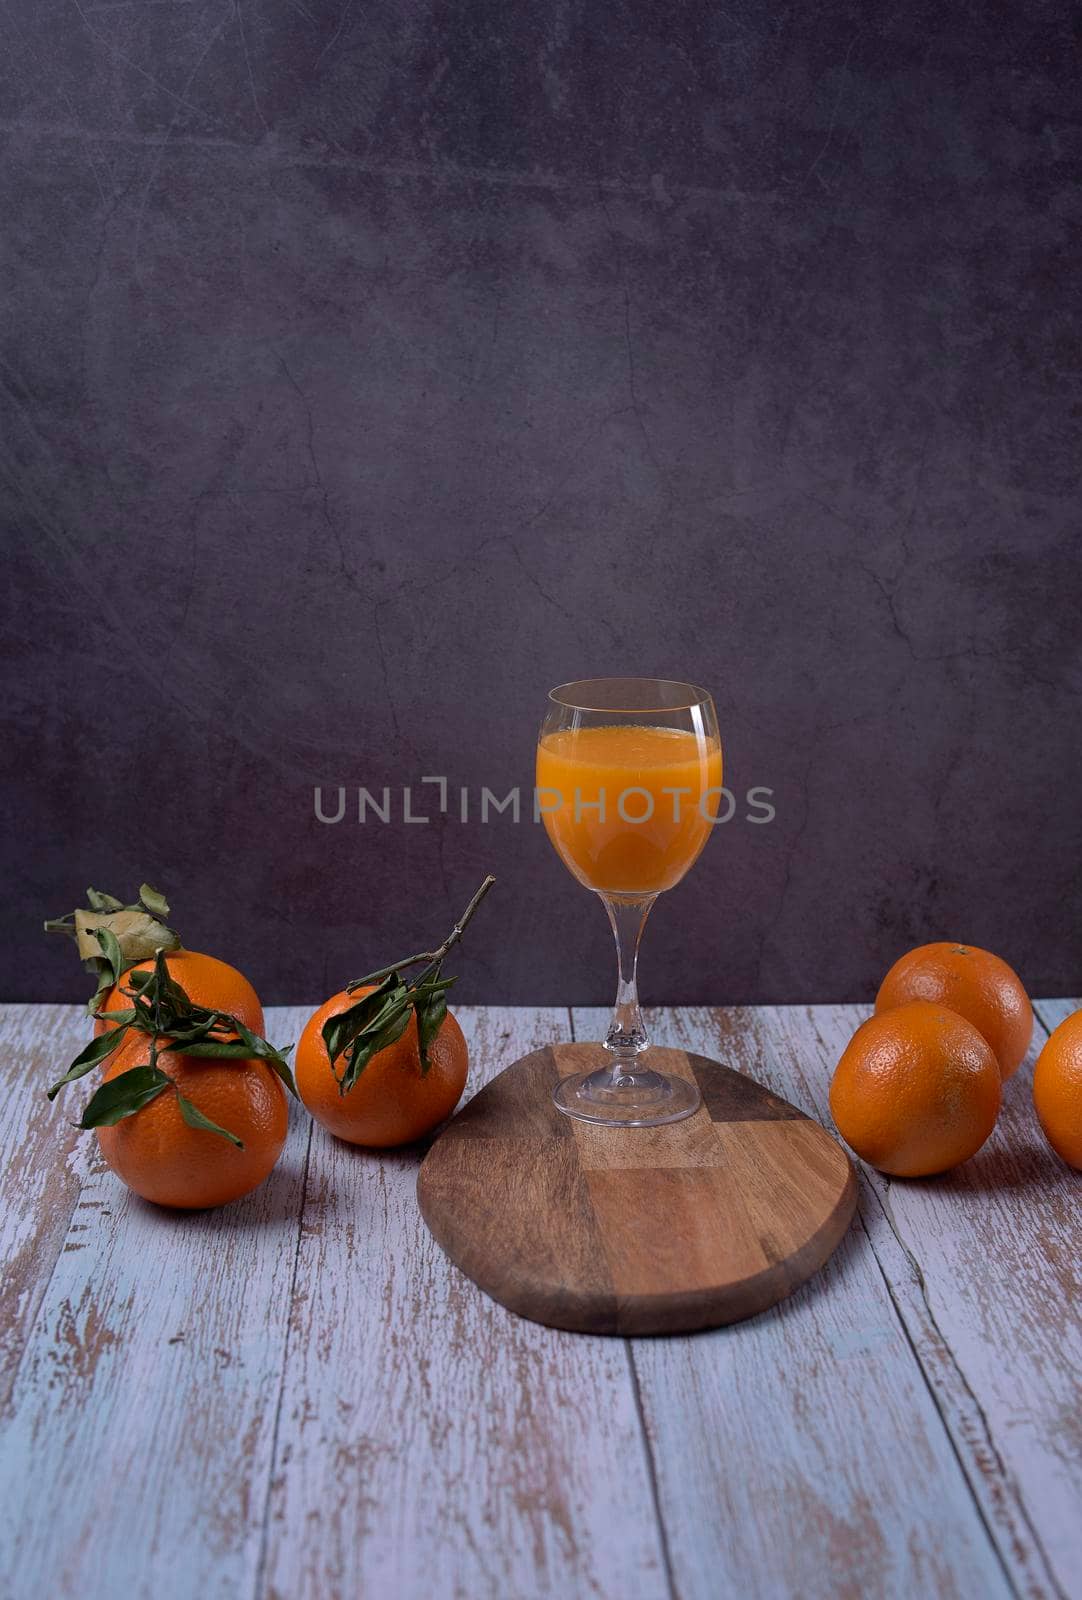 Glass of orange juice on wooden table with various oranges marble background wooden floor